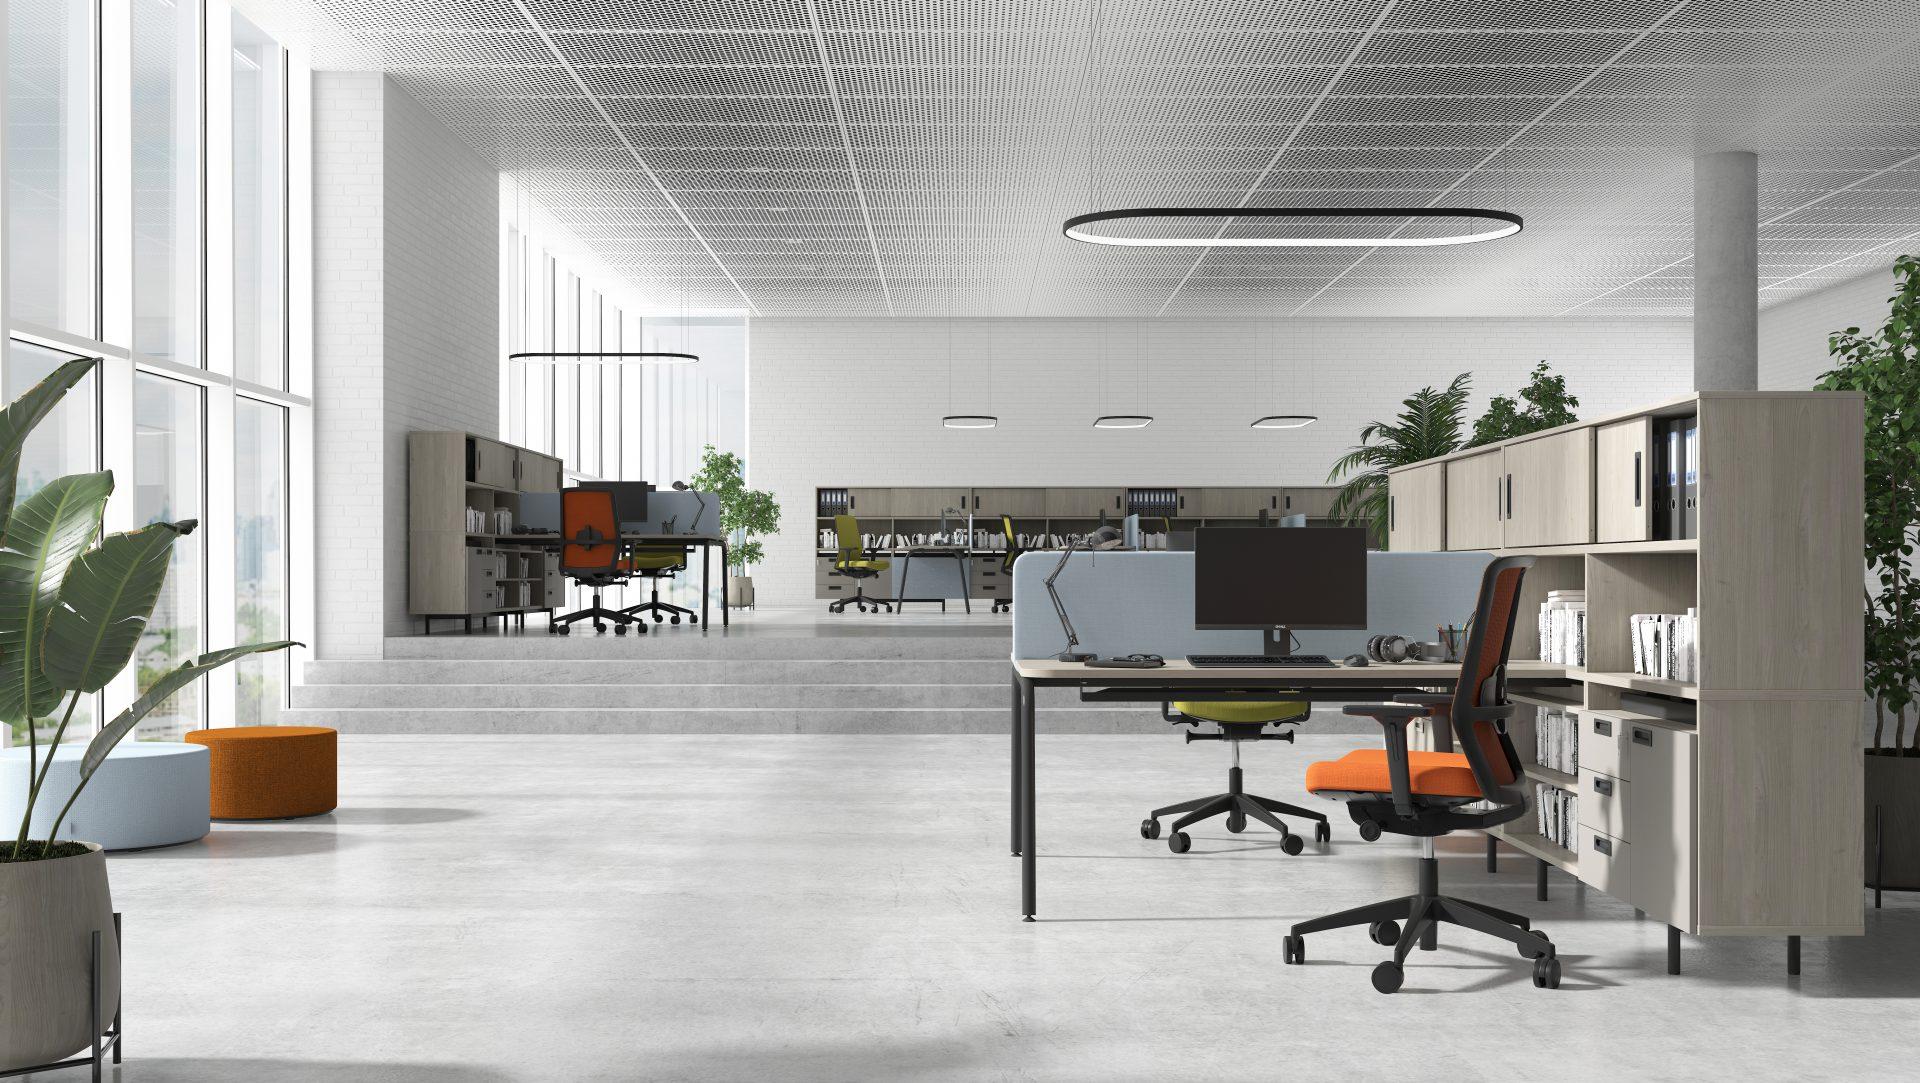 Round workstations help to partition open plan office layouts